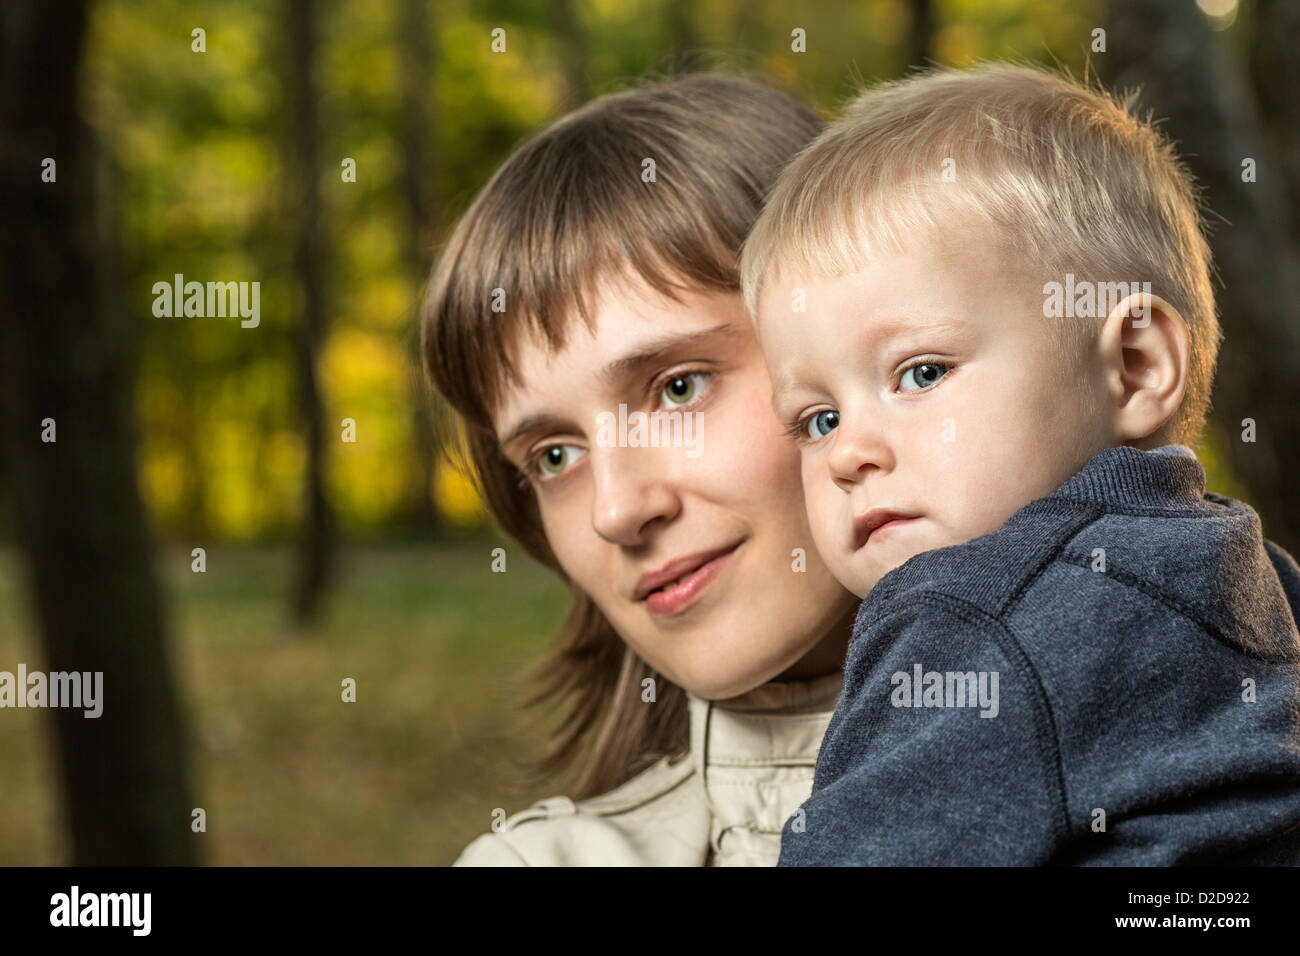 A mother holding her young son and looking away serenely Stock Photo